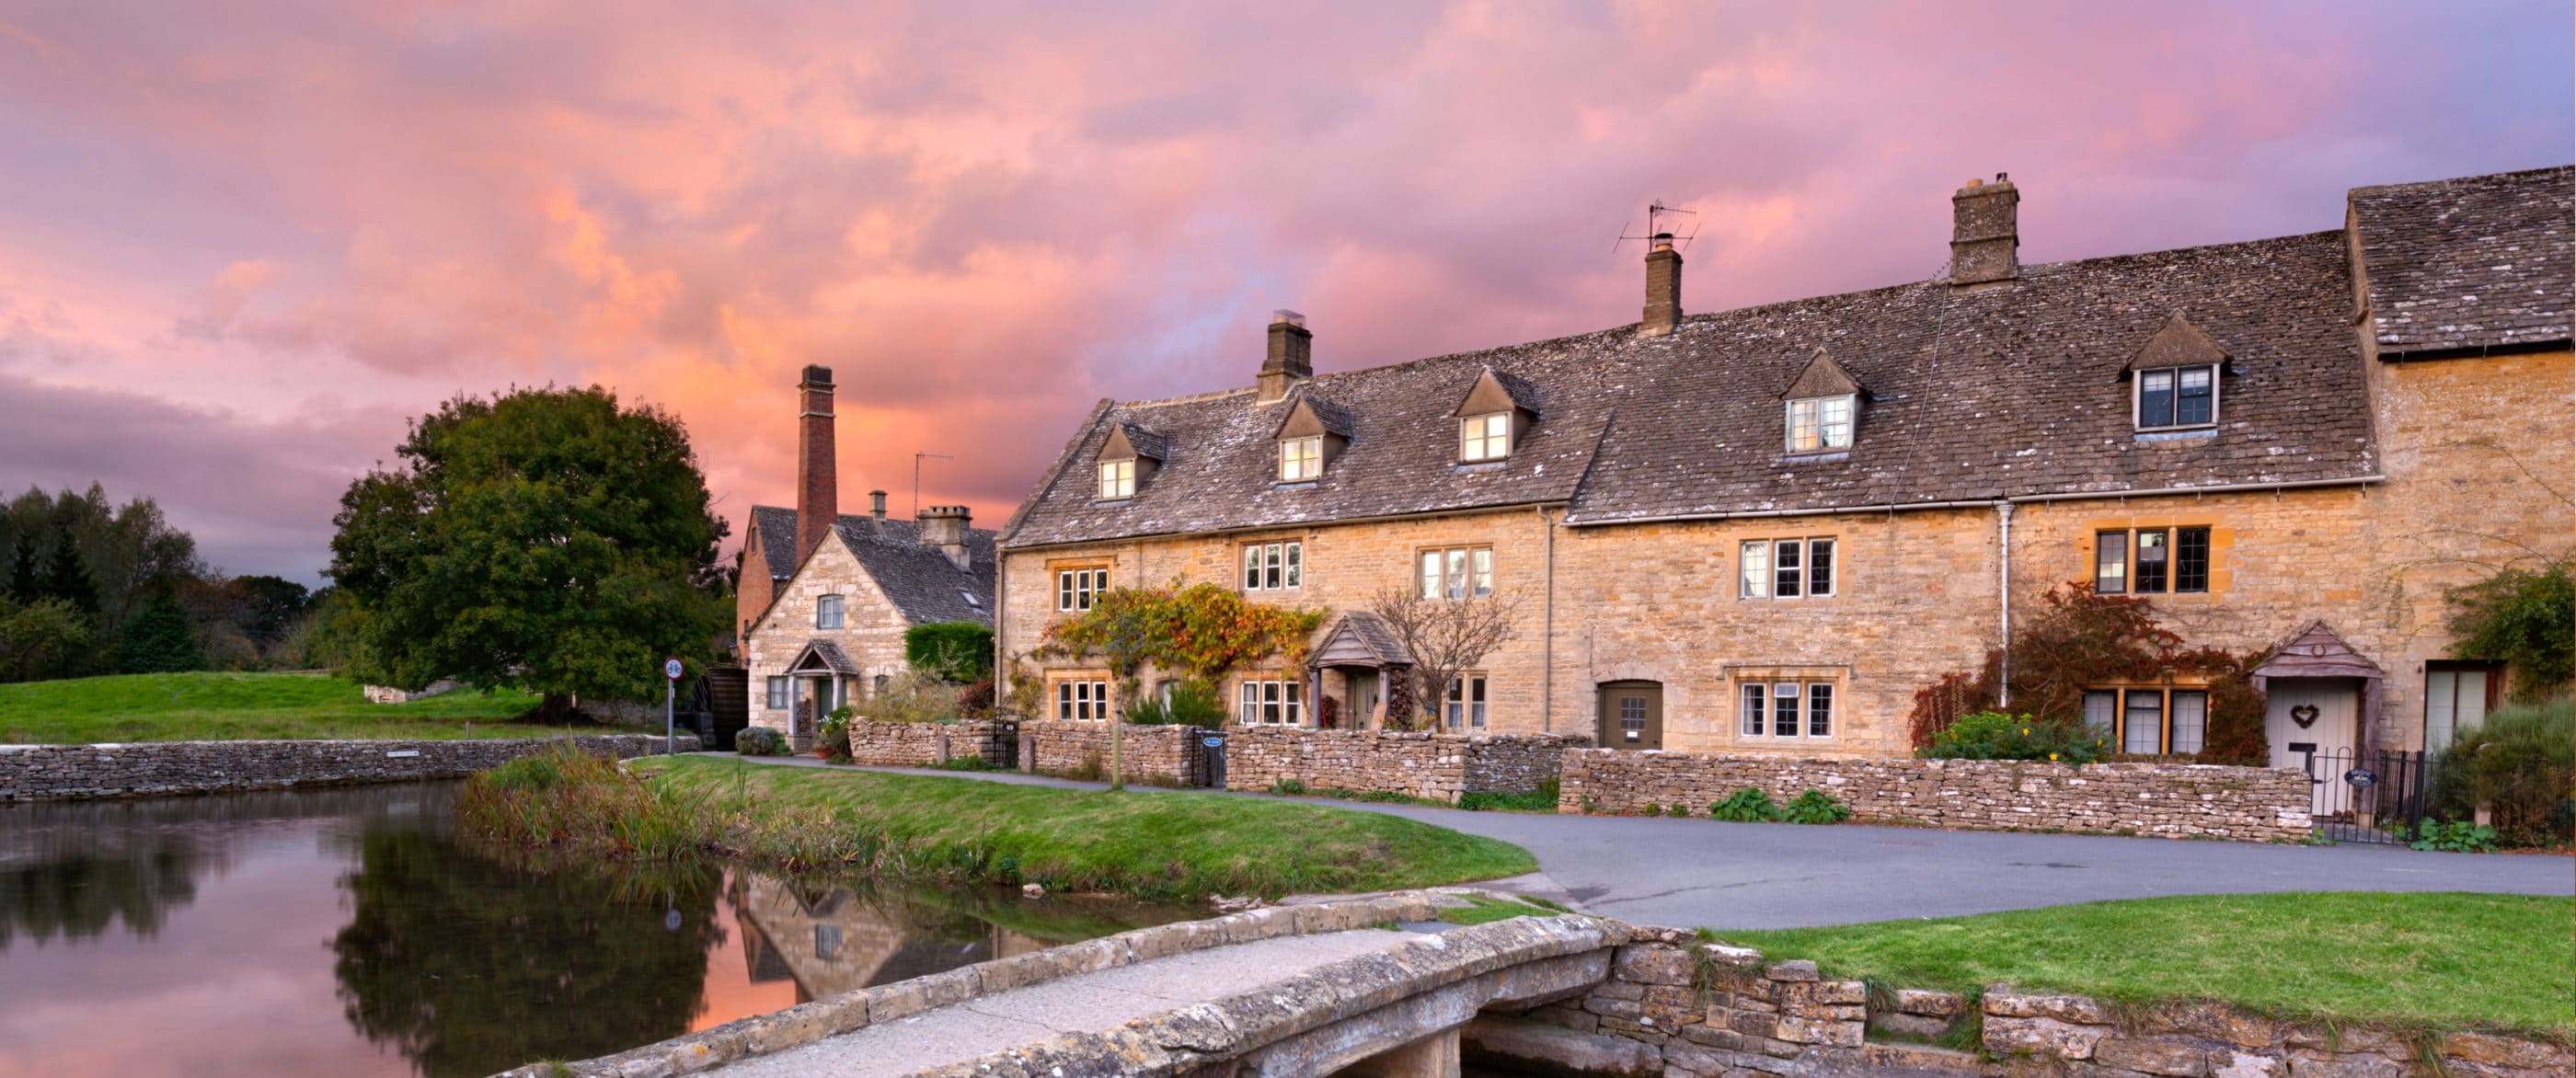 Historic Bed and Breakfasts in the Cotswolds - Historic UK